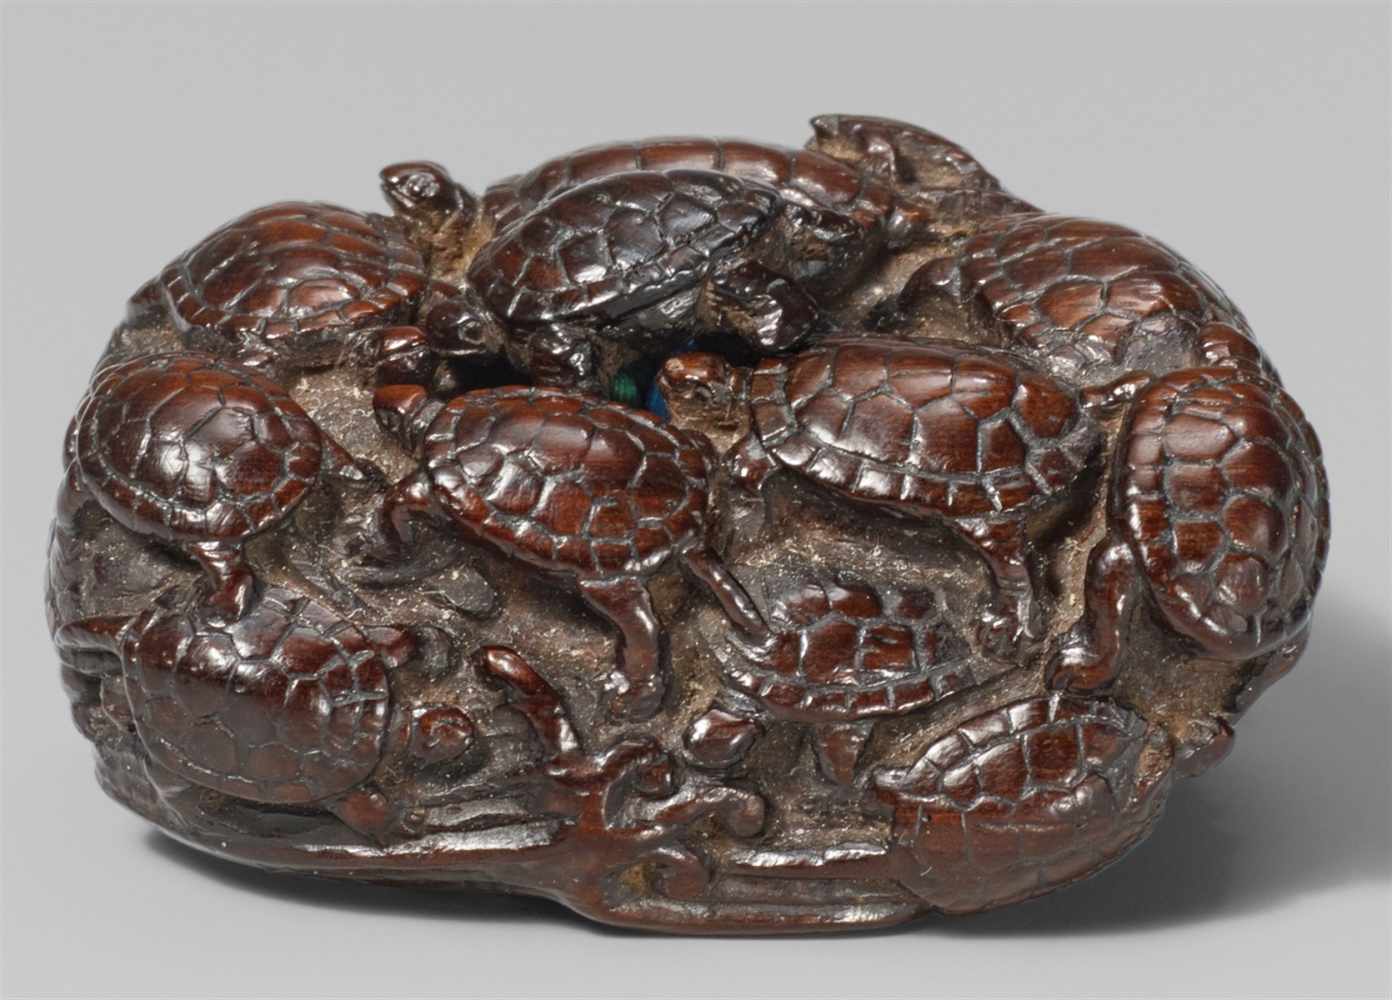 A reddish-brown wood netsuke of a group of fifteen tortoises, by Yôzan. Early 19th centuryPartly